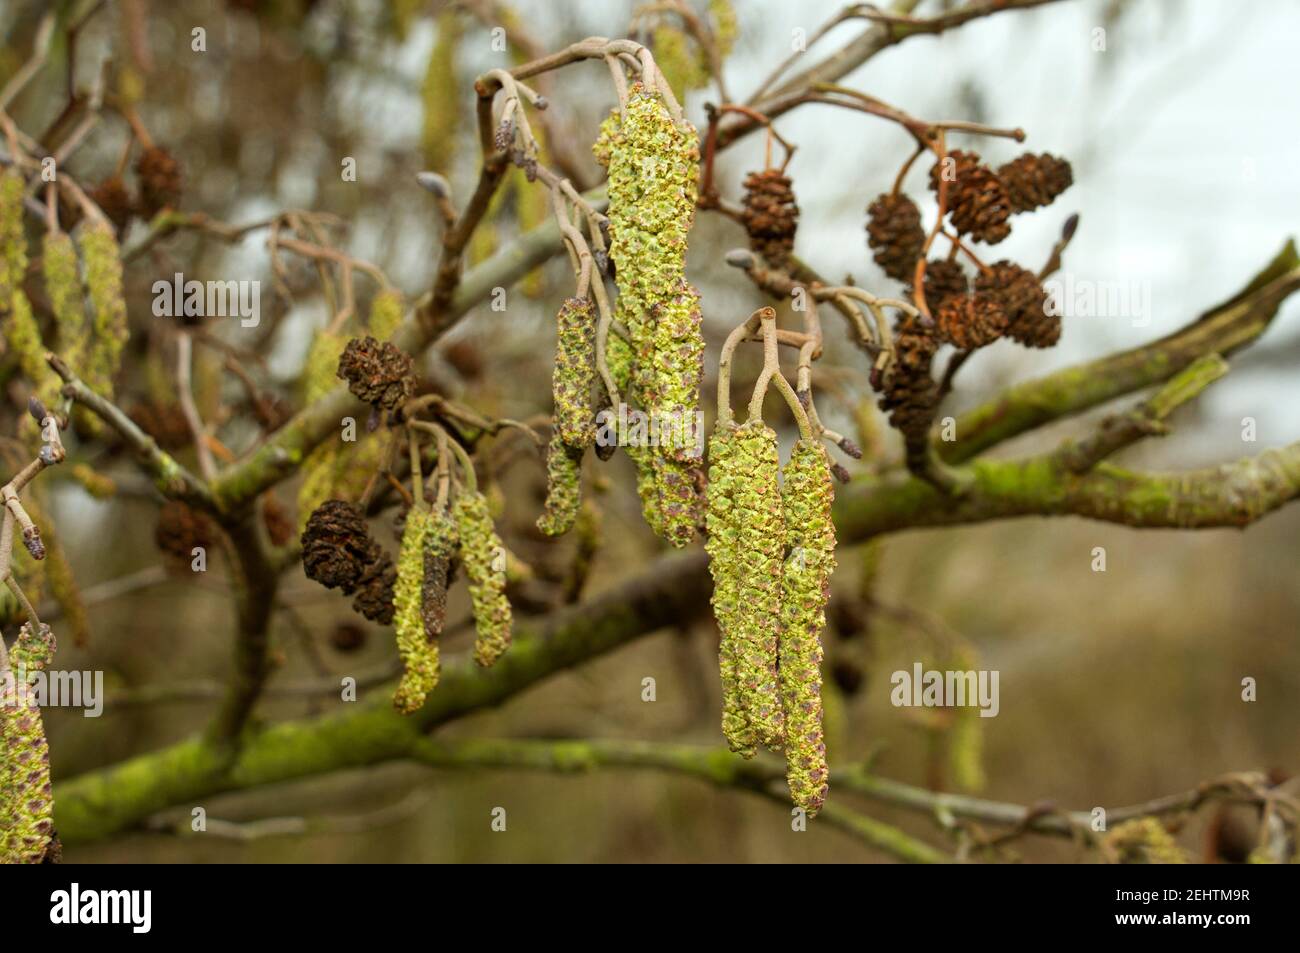 The flowering male parts of the Alder tree, the 'Catkin', start to develop in late winter and is one of the earliest UK trees to flower and pollinate. Stock Photo